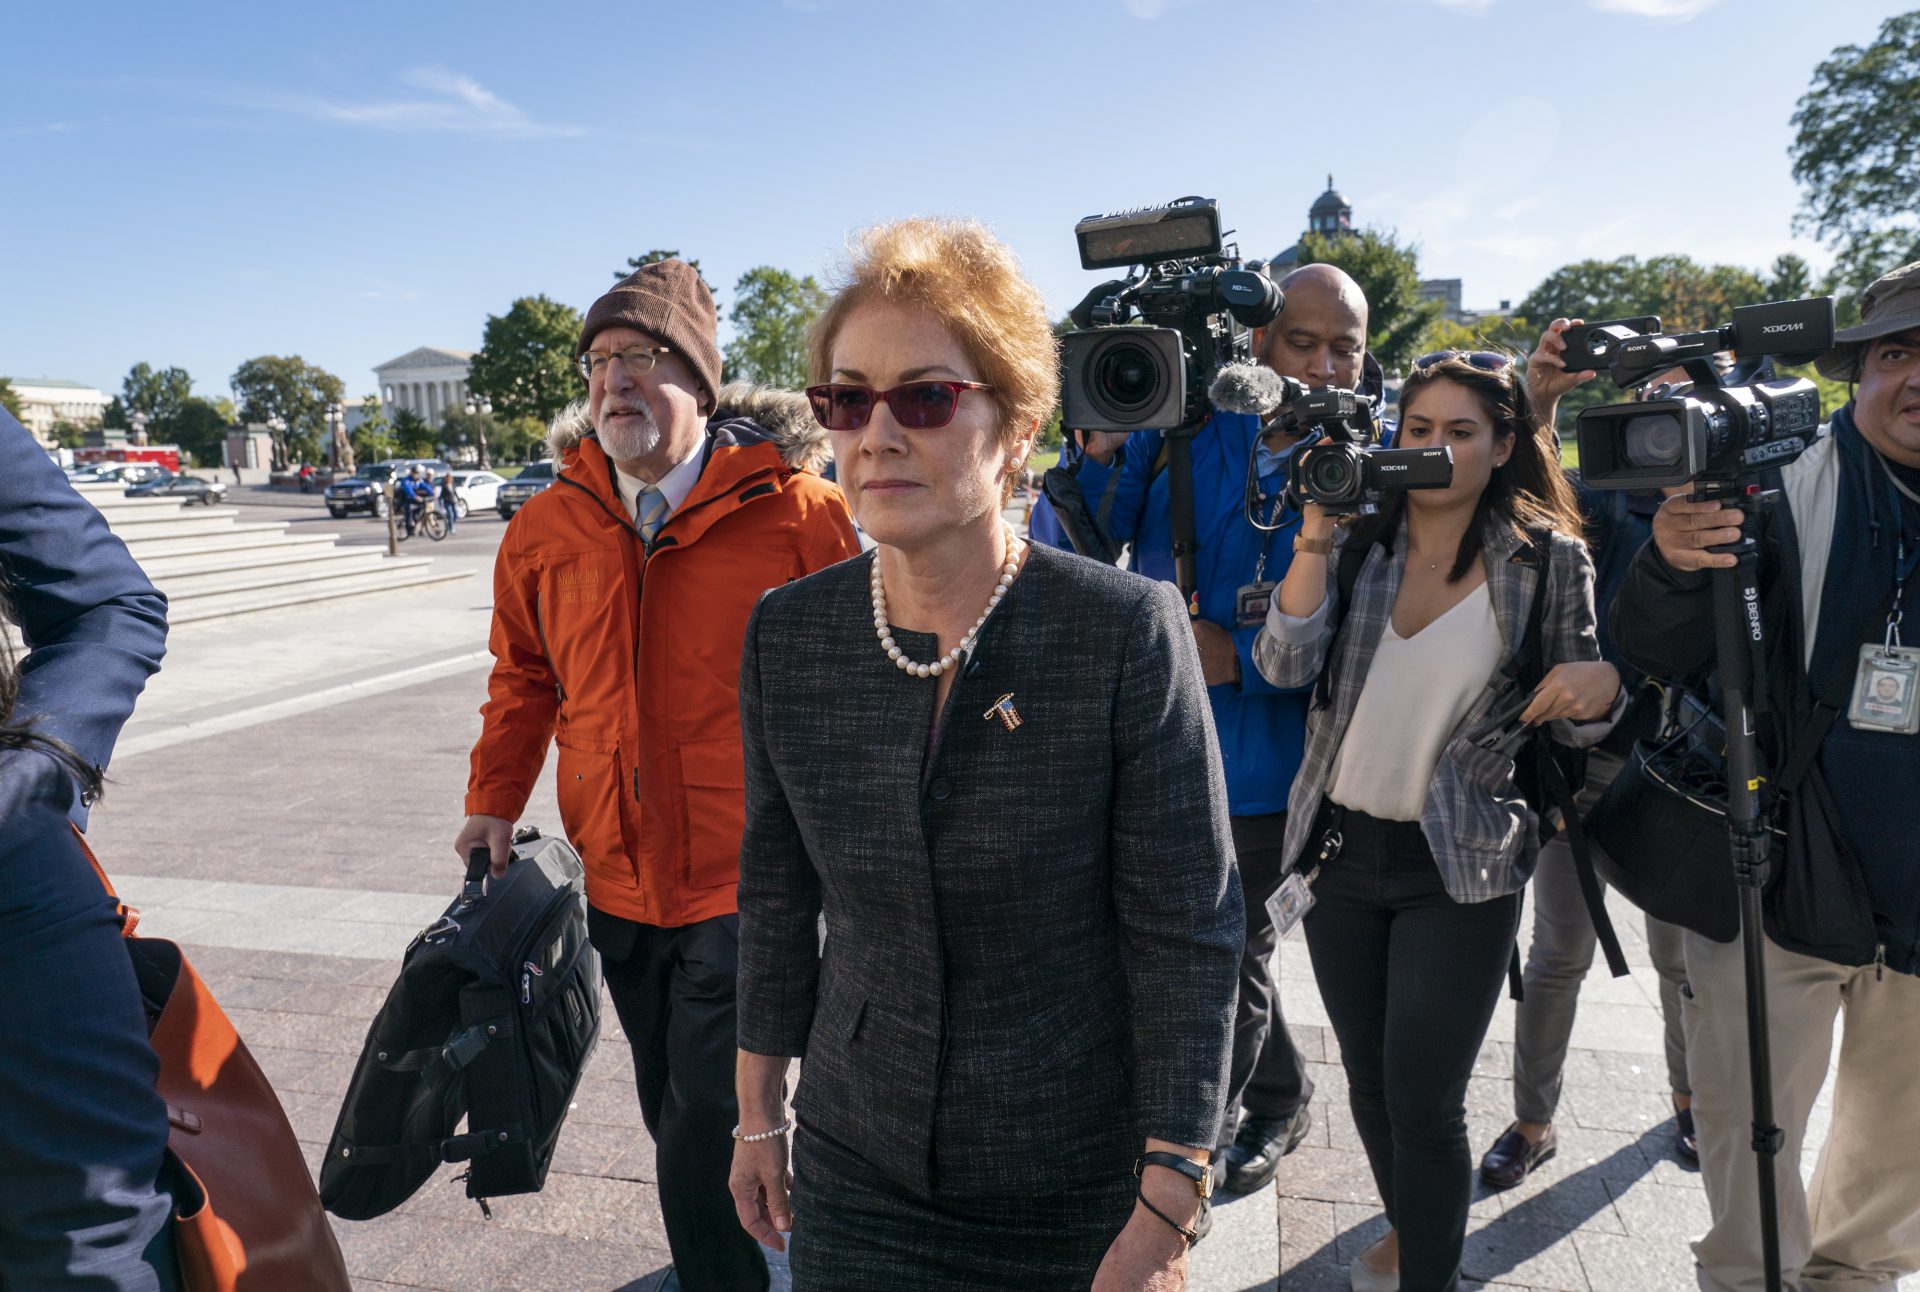 Former U.S. ambassador to Ukraine Marie Yovanovitch, arrives on Capitol Hill, Friday, Oct. 11, 2019, in Washington, as she is scheduled to testify before congressional lawmakers on Friday as part of the House impeachment inquiry into President Donald Trump.